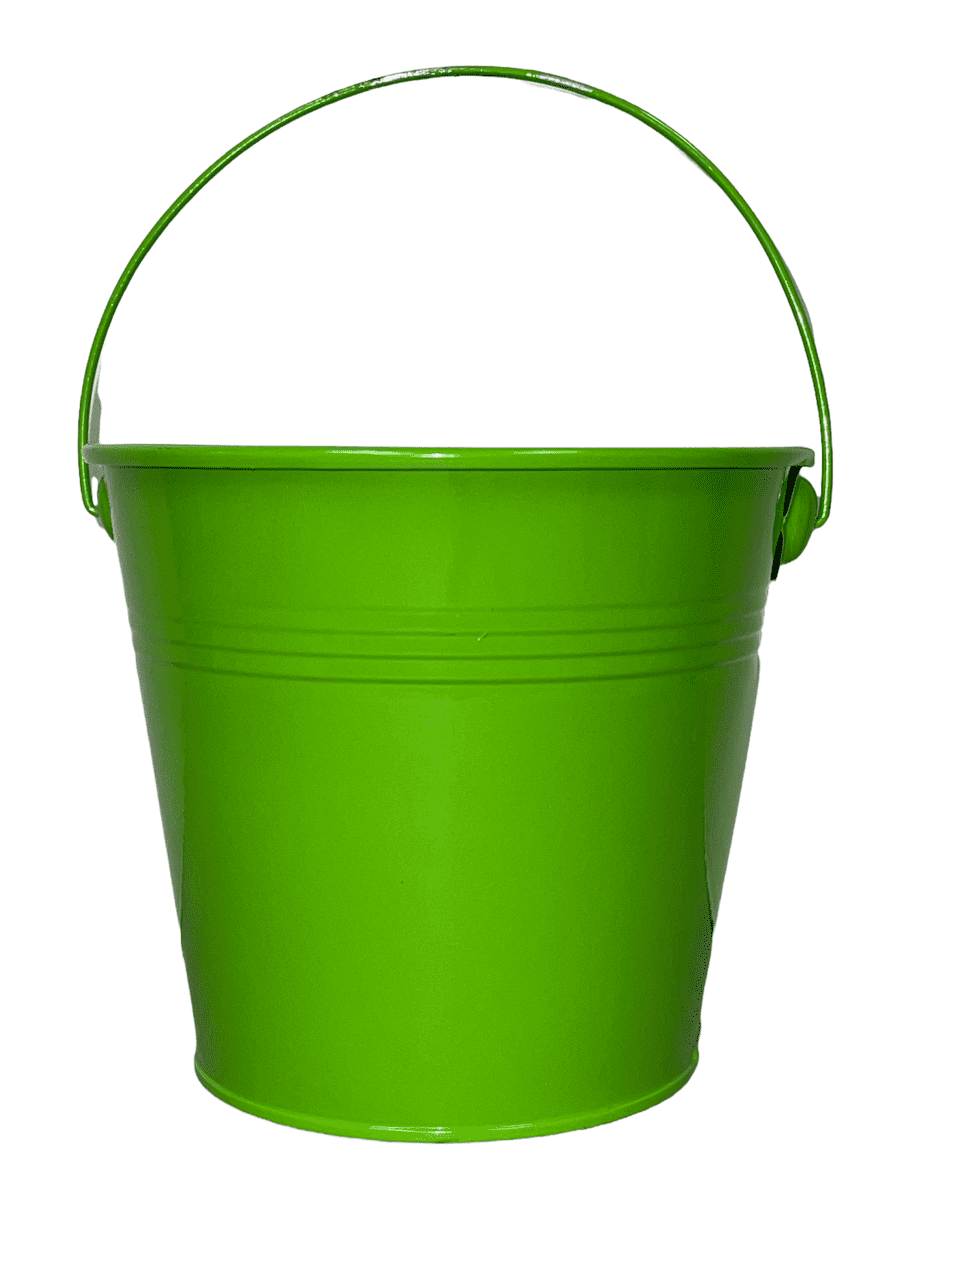 4Pcs 2x2 Small Metal Bucket Colorful Mini Buckets with Handles Assorted  Colors - Blue, Red, Pink, Yellow - Bed Bath & Beyond - 37258105